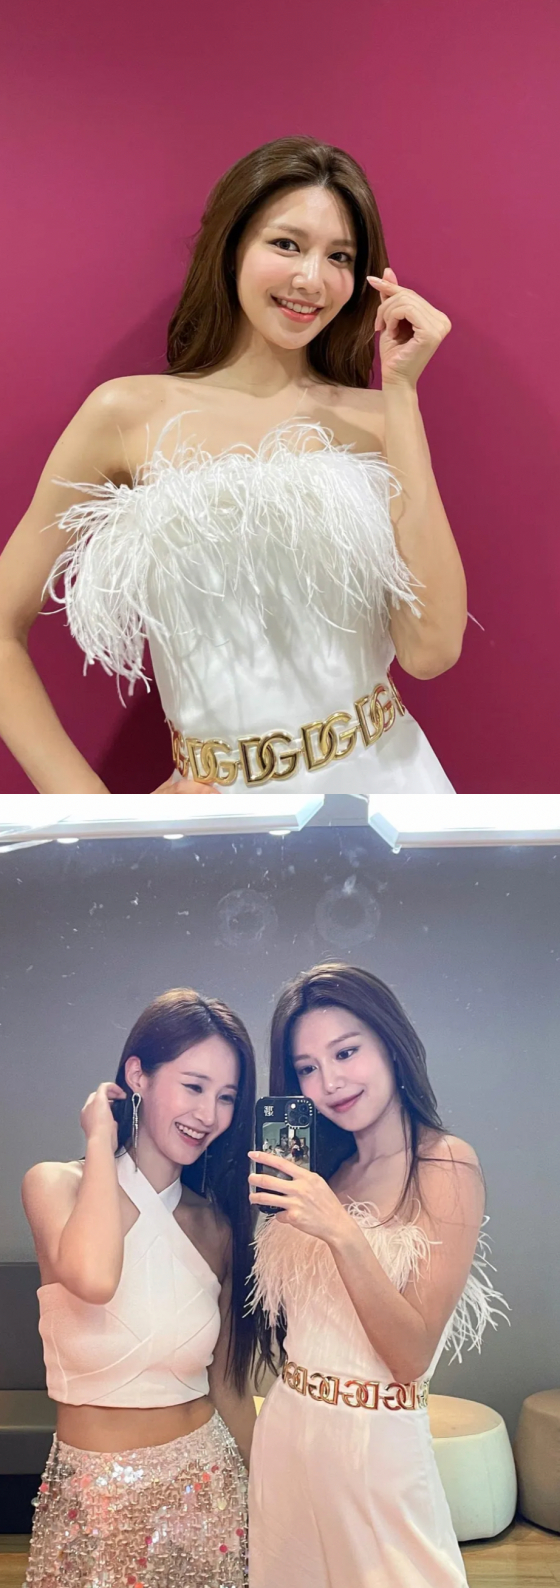 Sooyoung posted several photos on his 20th day with an article entitled Music Center GG4EVA in his instagram.In the open photo, Sooyoung is wearing a white stage costume and taking a mirror selfie.In particular, the same group Hyoyeon appeared on JTBC Knowing Brother on the 13th, and the long straight hair of Sooyoung, which became a hot topic, is attracting attention.Despite the point, Sooyoung added a smile to the face of Hyoyeon with his hair at the moment of ending pose on KBS 2TV Music Bank stage on the 19th.Meanwhile, the group Girls Generation, which Sooyoung belongs to, released its regular 7th album Forever 1 on the 15th anniversary of its debut.